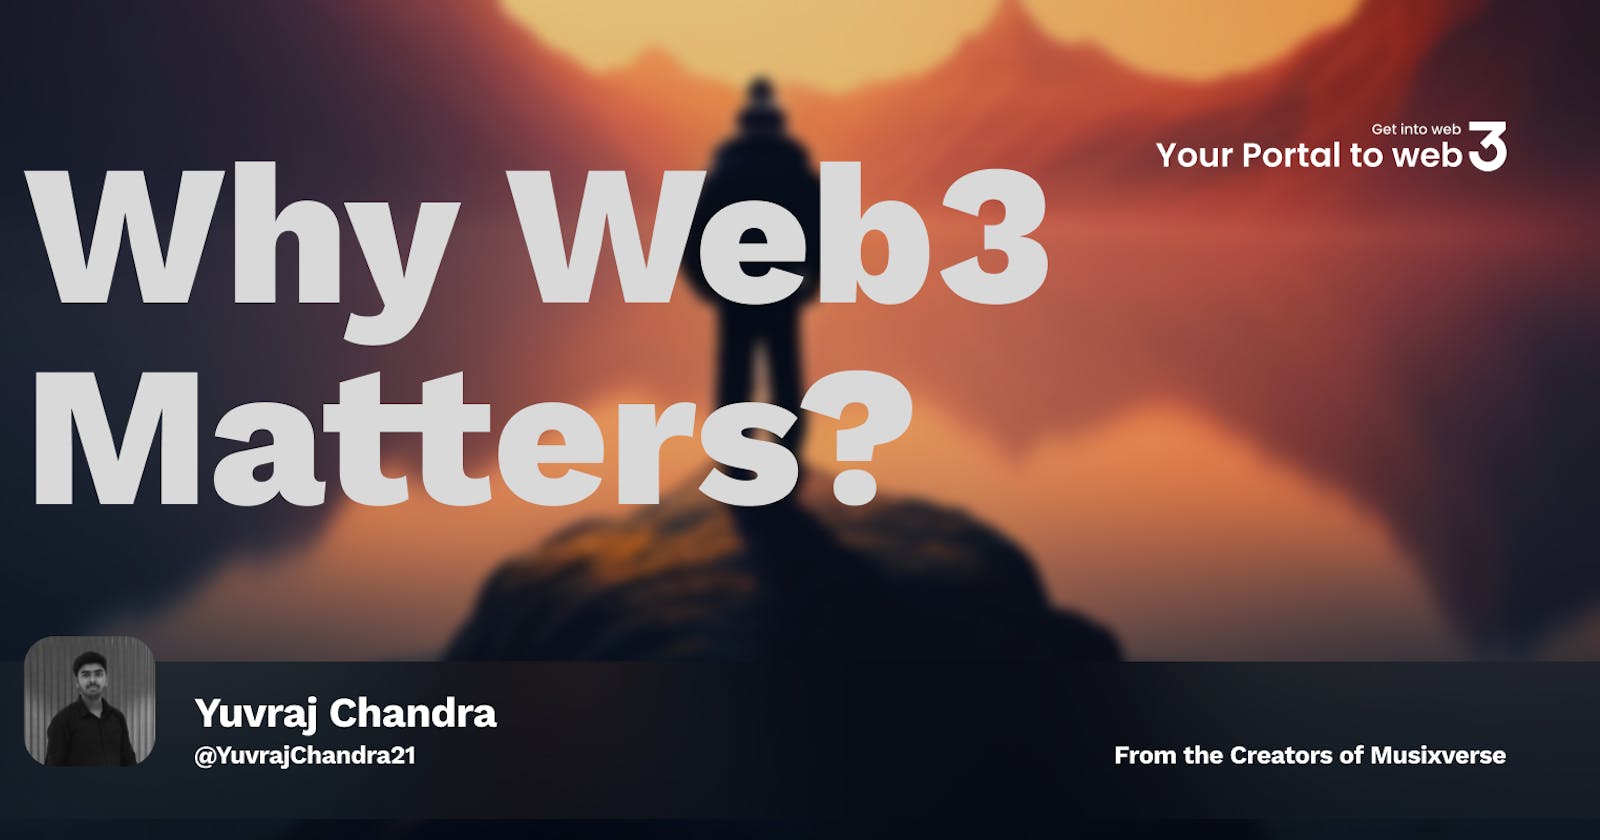 Why Web3 Matters?